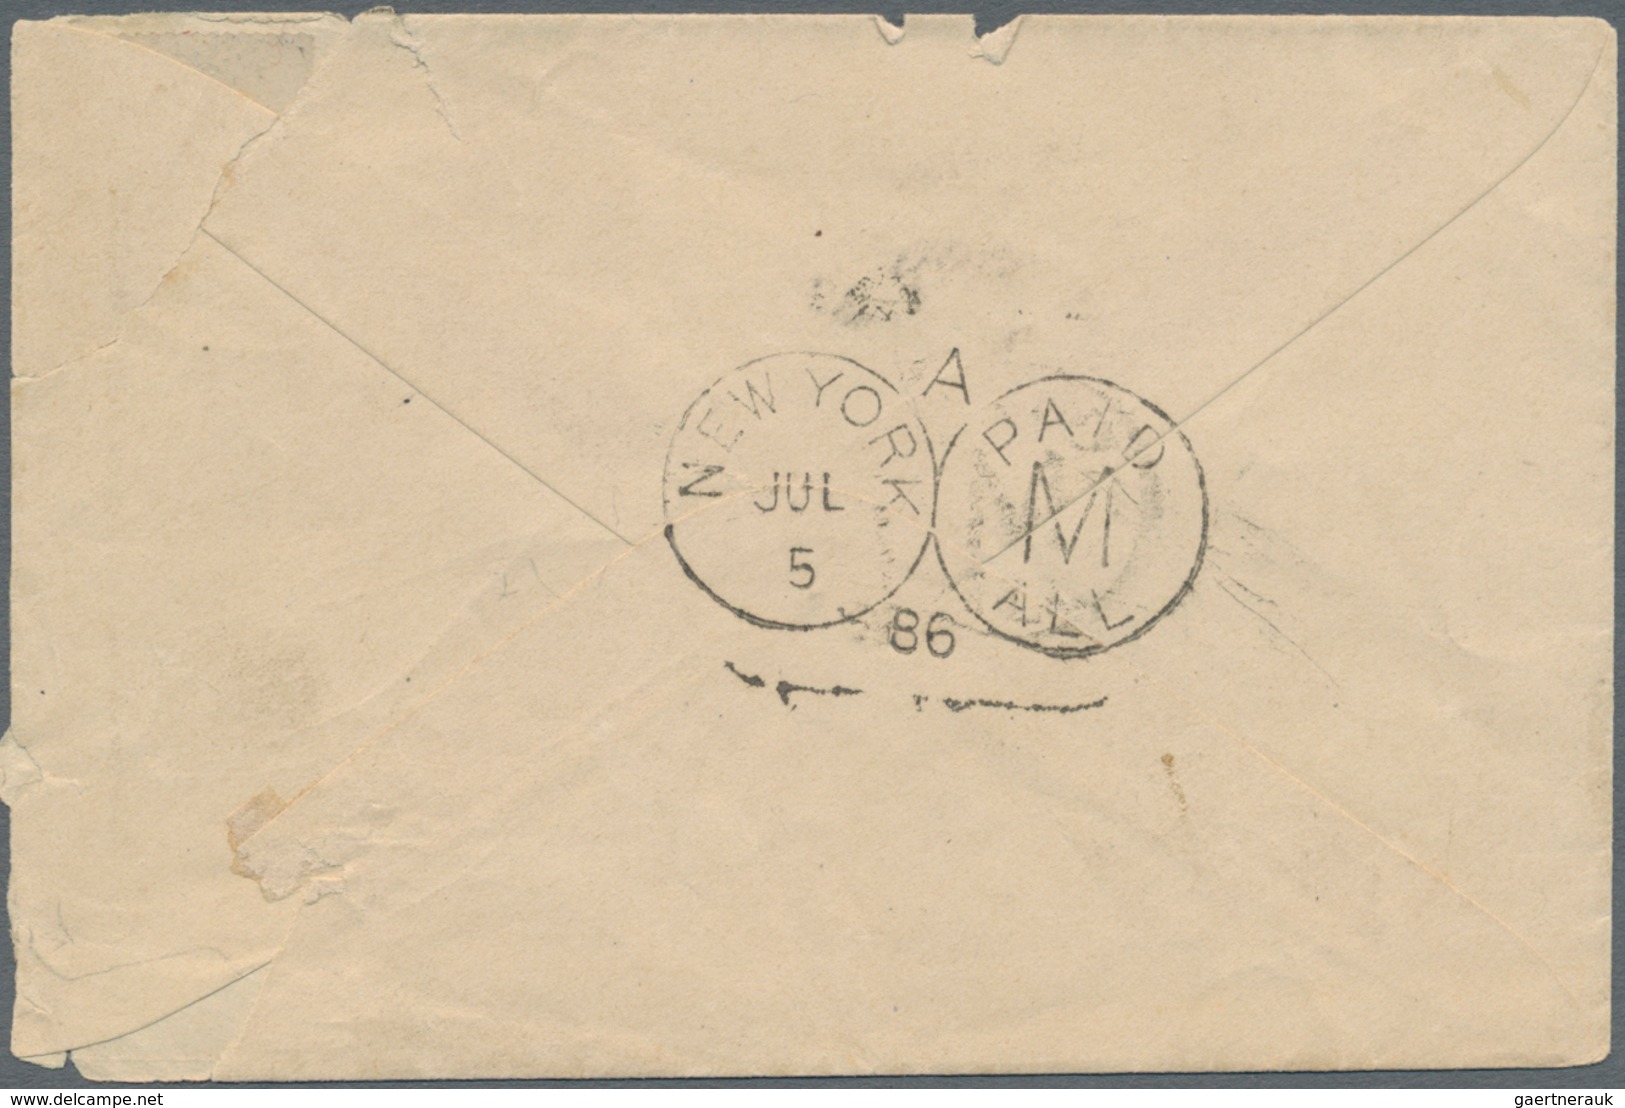 Kolumbien: 1884/1886, group of 4 covers, each with single franking 10 C orange on yellow "coat of ar